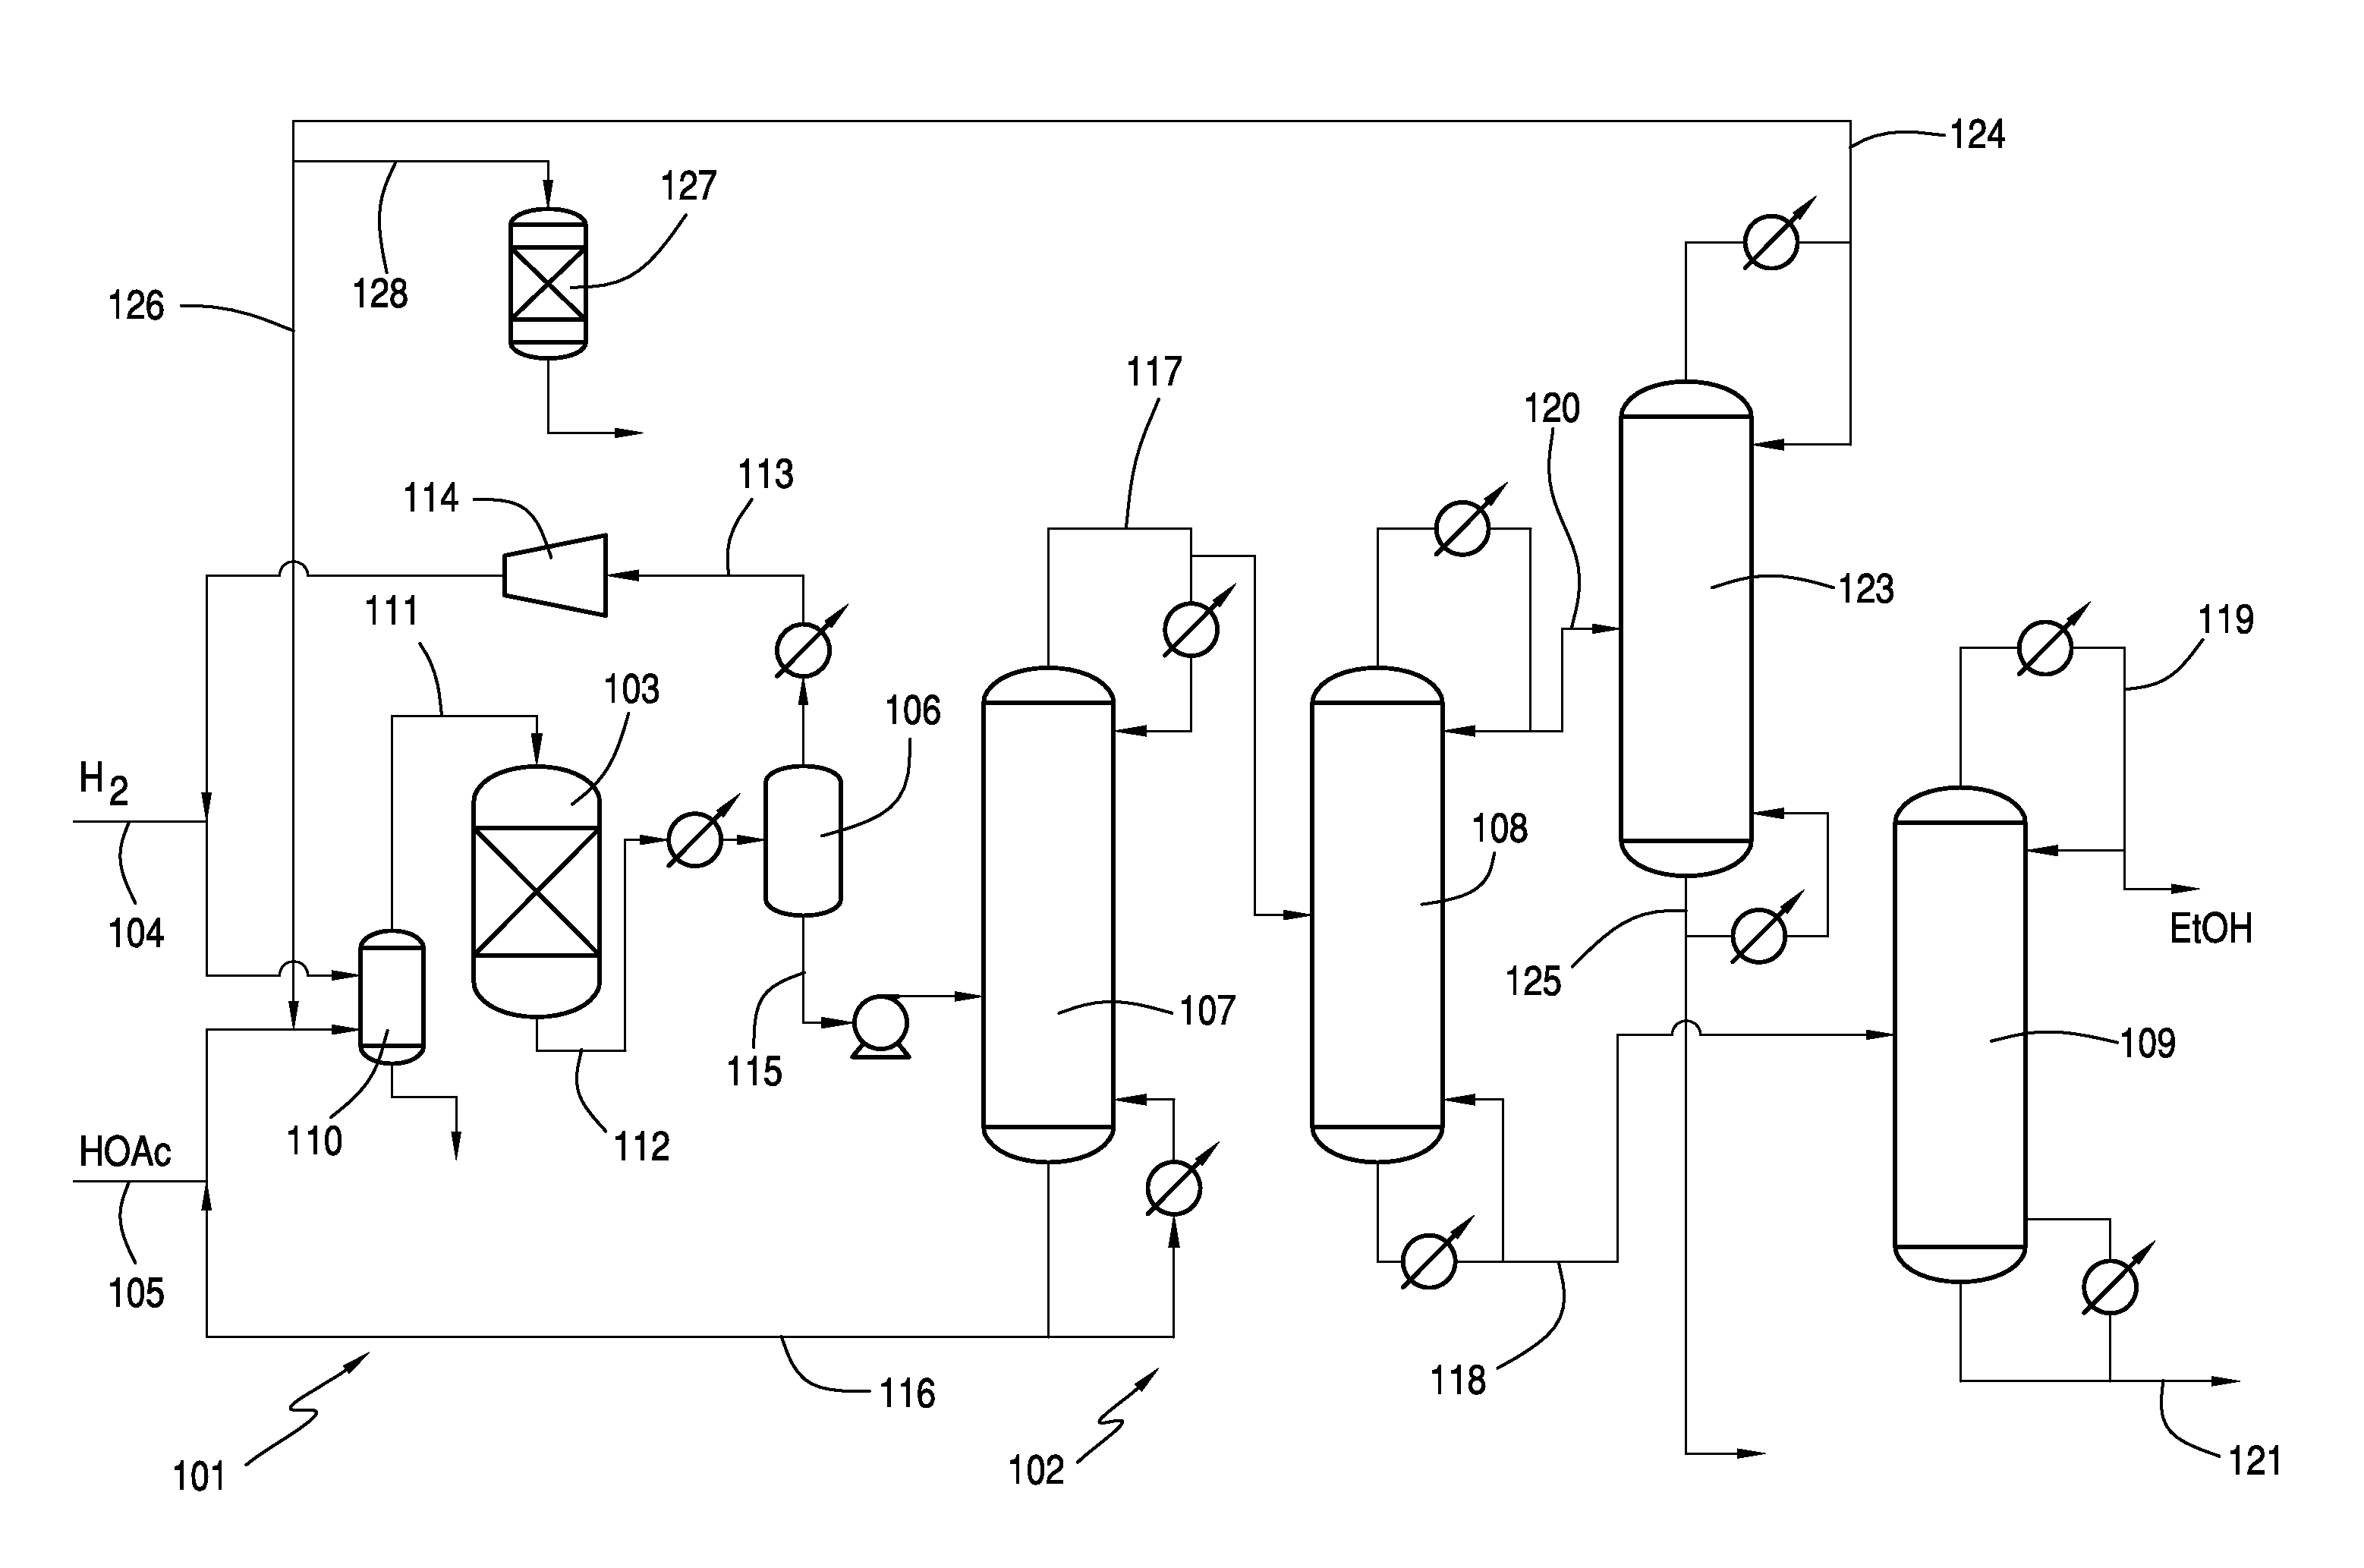 Process for purifying ethanol